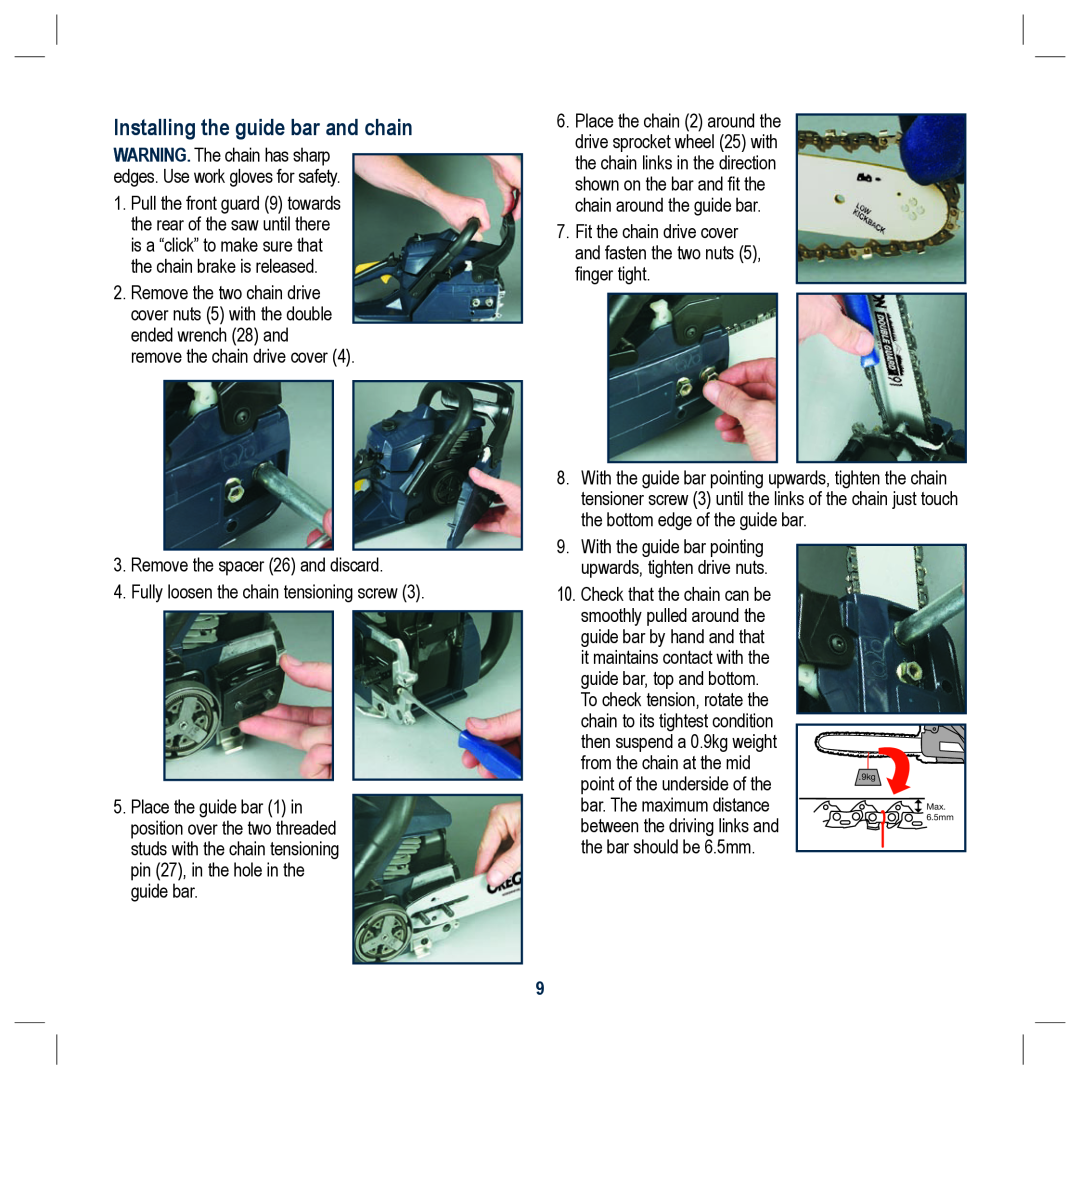 Global Machinery Company PCH37 instruction manual Installing the guide bar and chain, Remove the spacer 26 and discard 